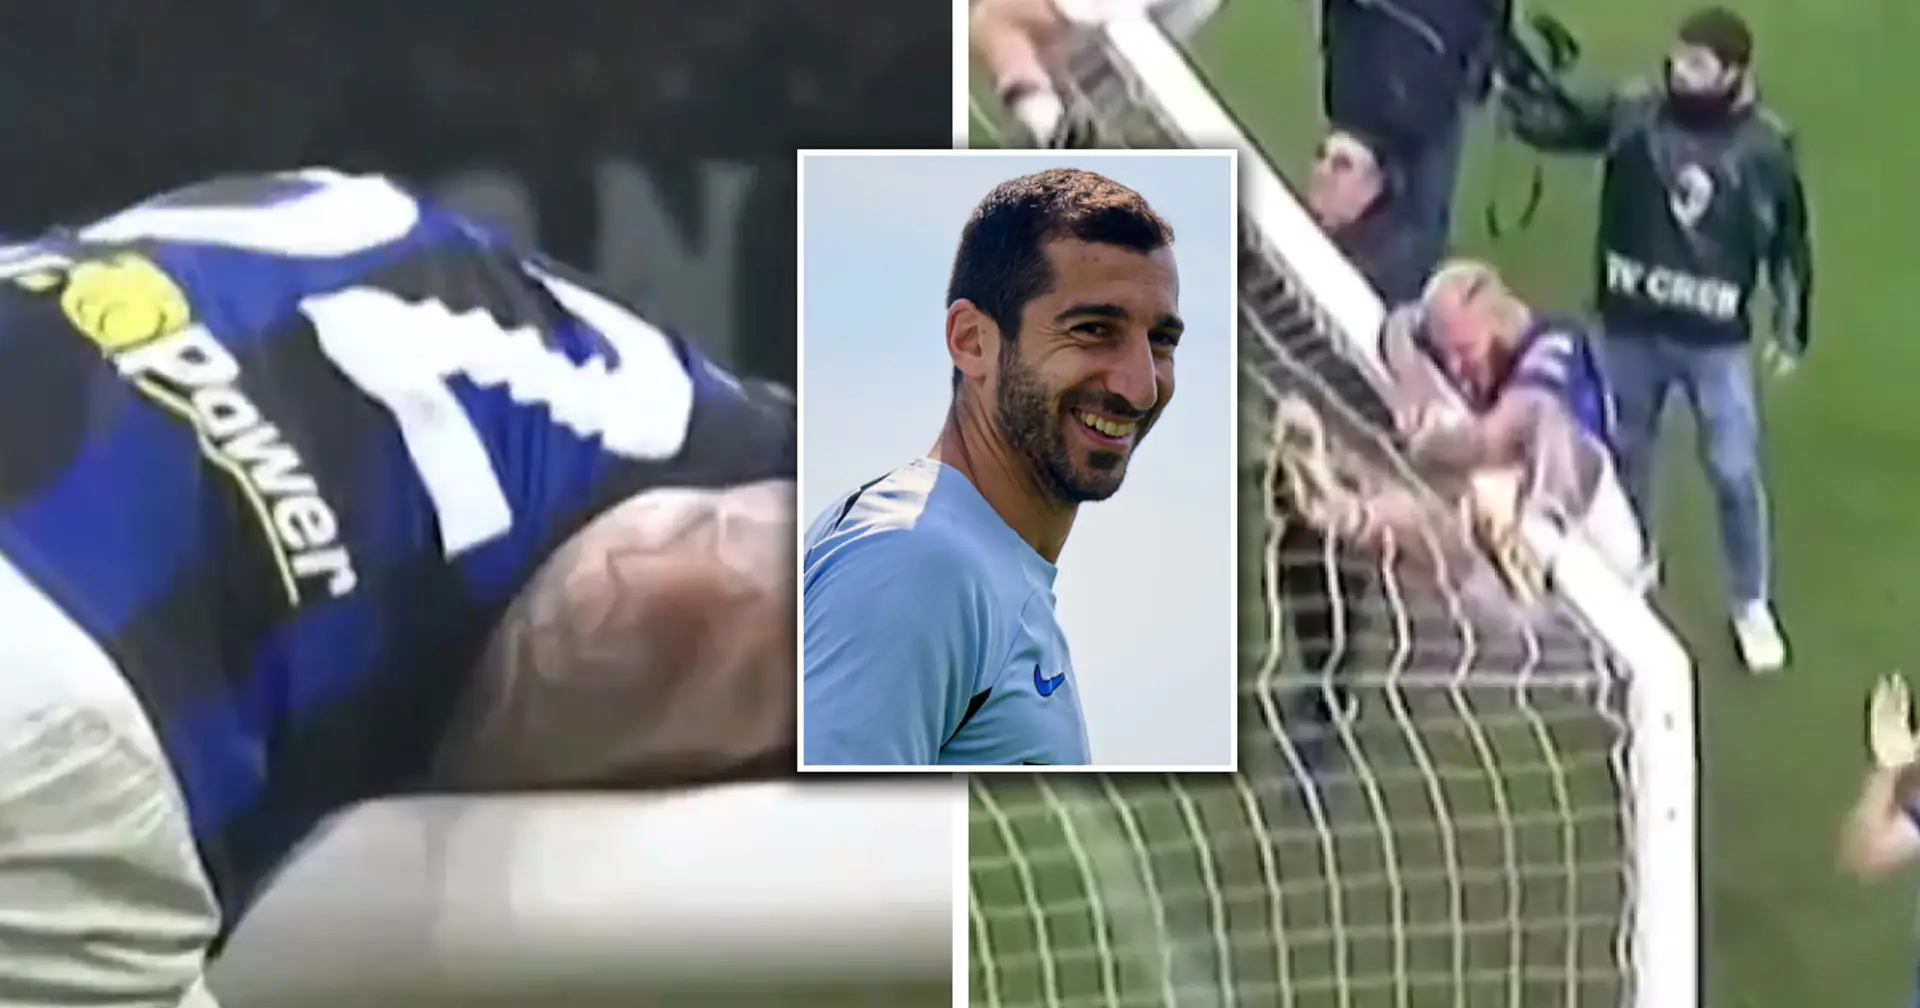 Henrikh Mkhitaryan saves the day for Federico Dimarco as he struggles to climb the goal